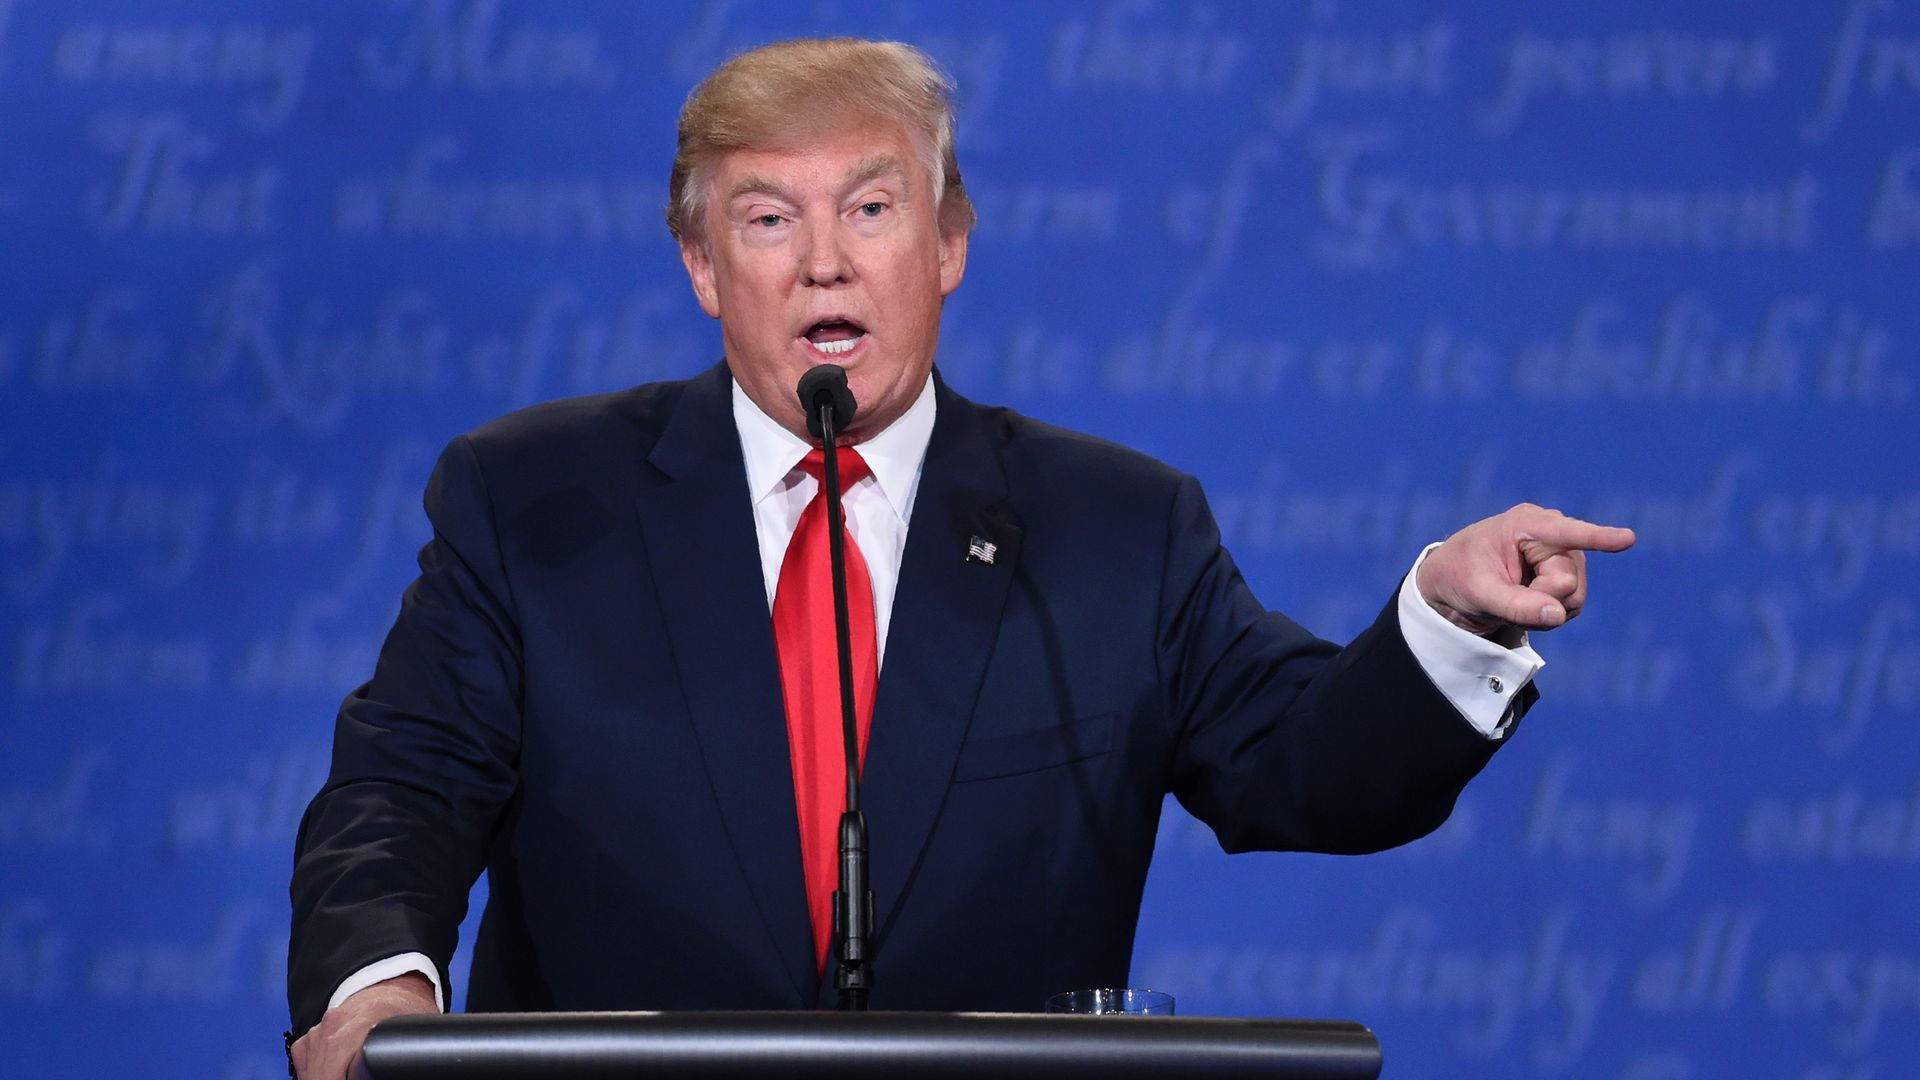 Presidential Trump on the debate stage during his 2016 presidential campaign.